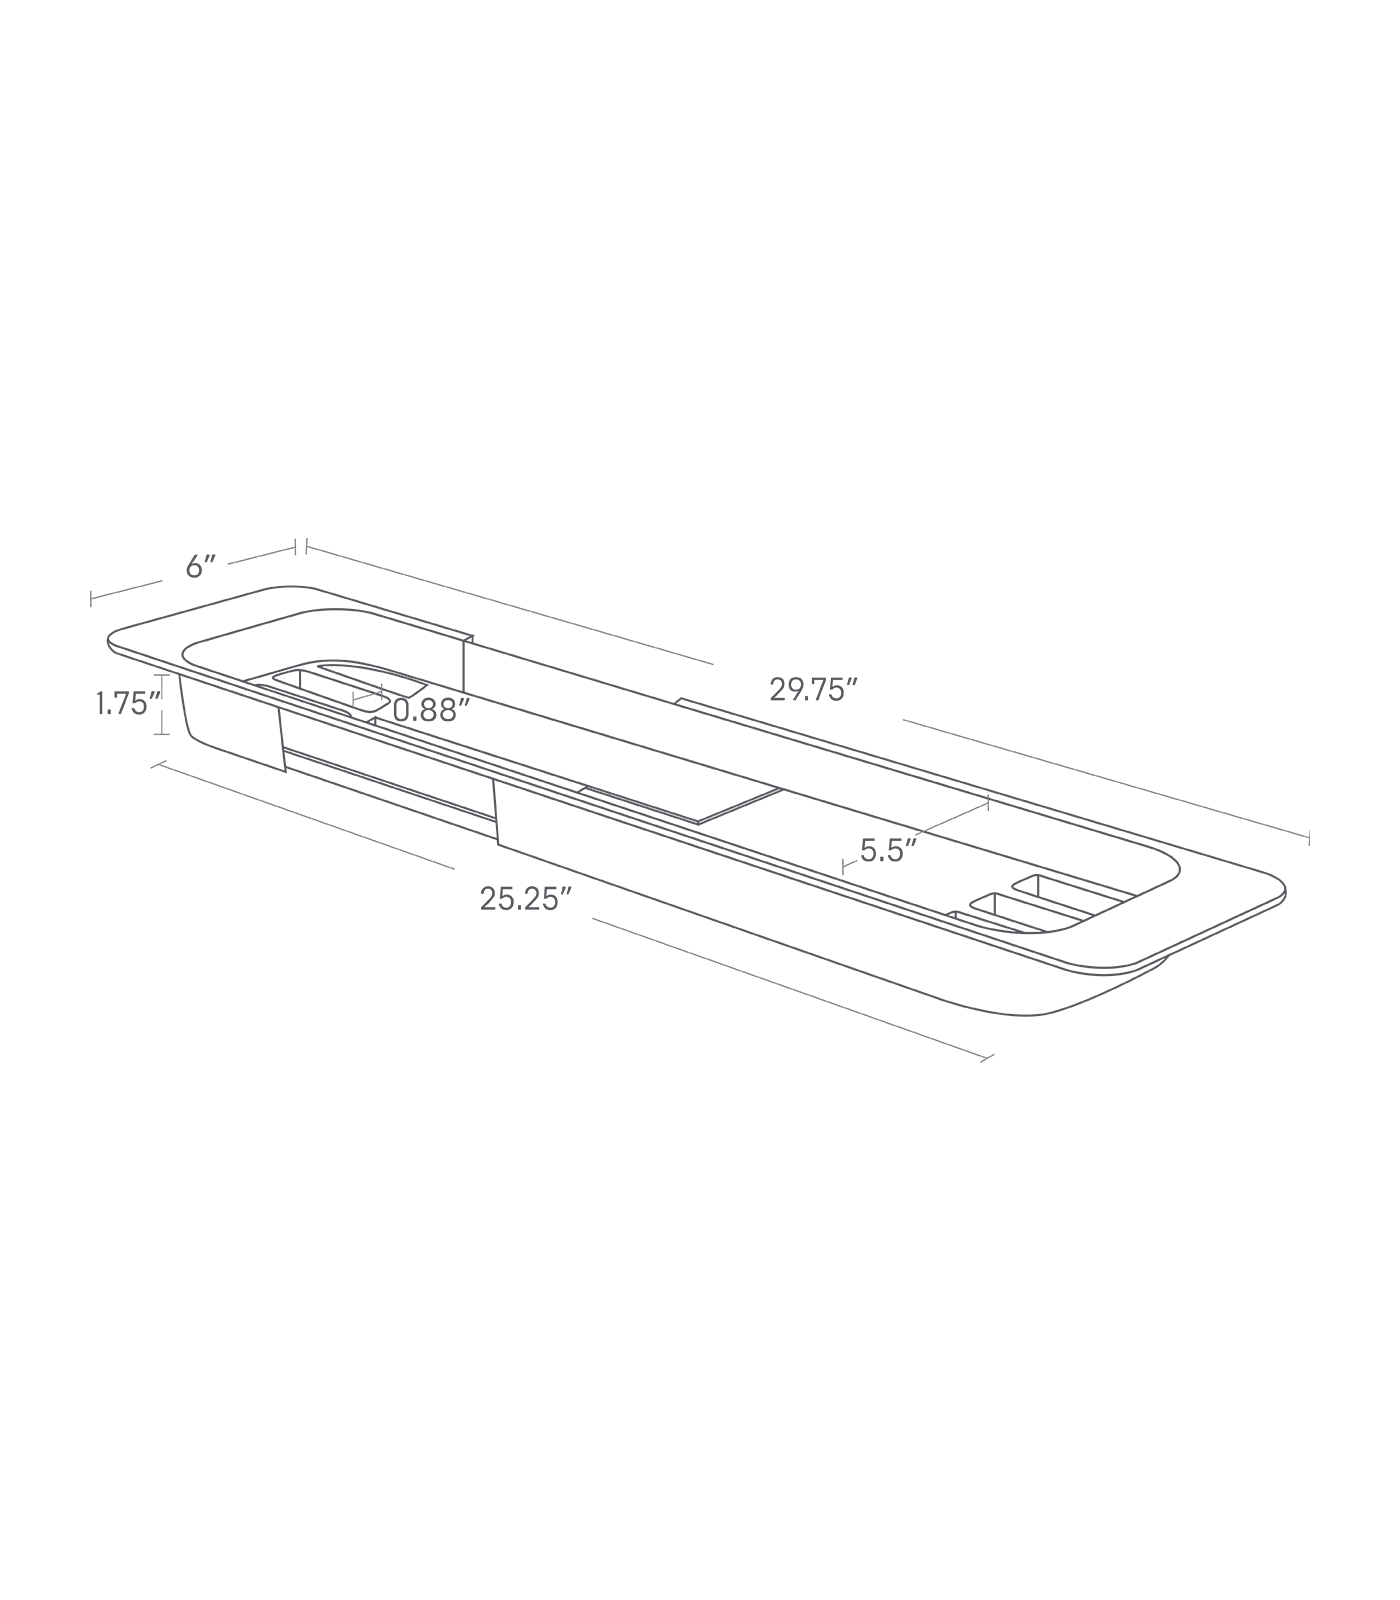 Dimension image for Expandable Bathtub Caddy on a white background including dimensions  L 6.1 x W 22.64 x H 1.77 inches